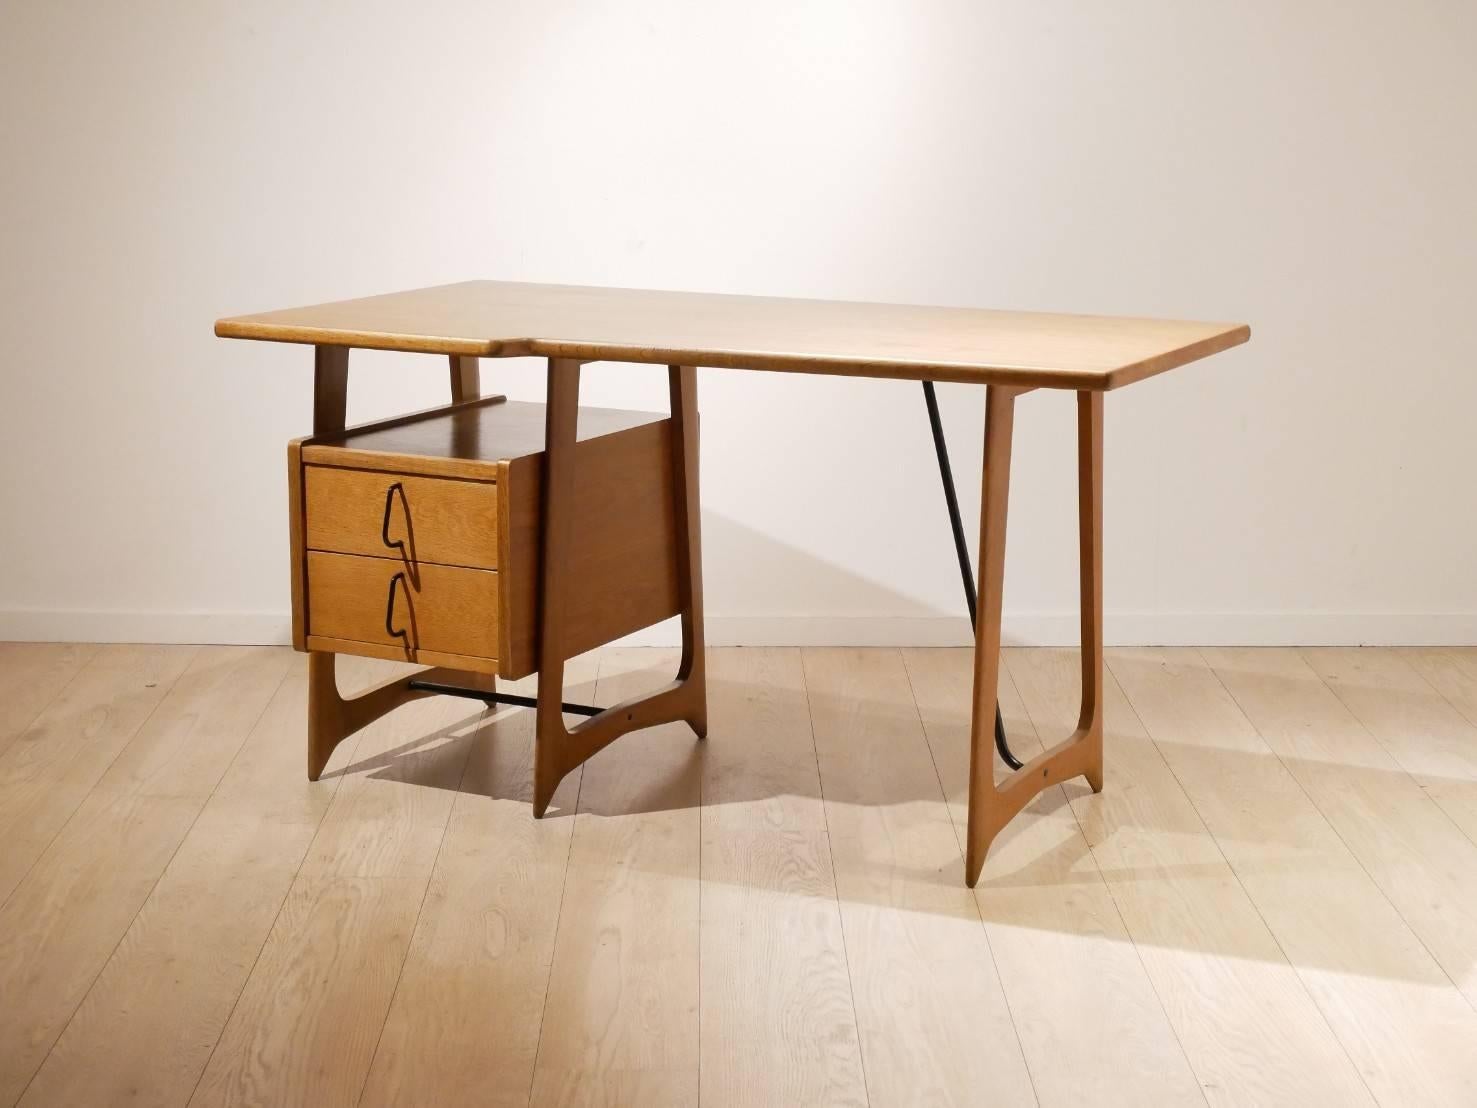 Midcentury French writing desk dating from the 